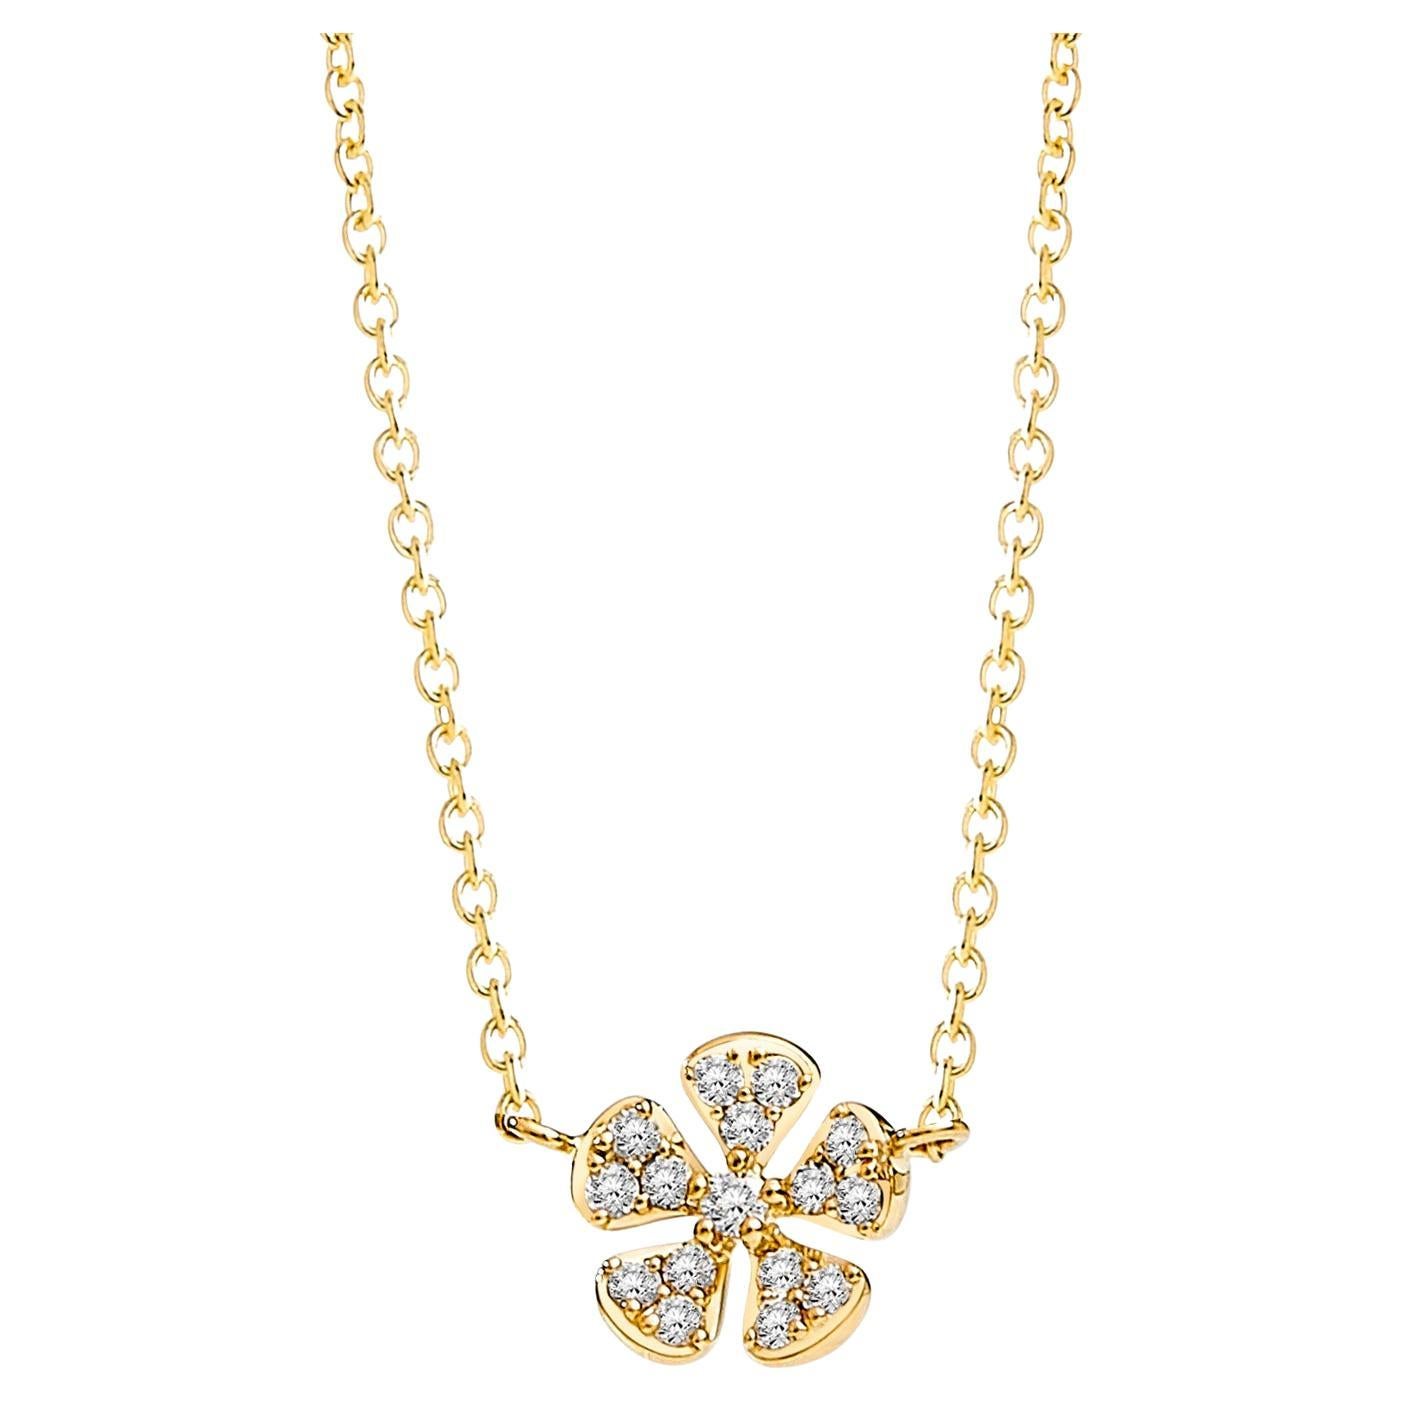 Syna Yellow Gold Jardin Flower Necklace with Diamonds